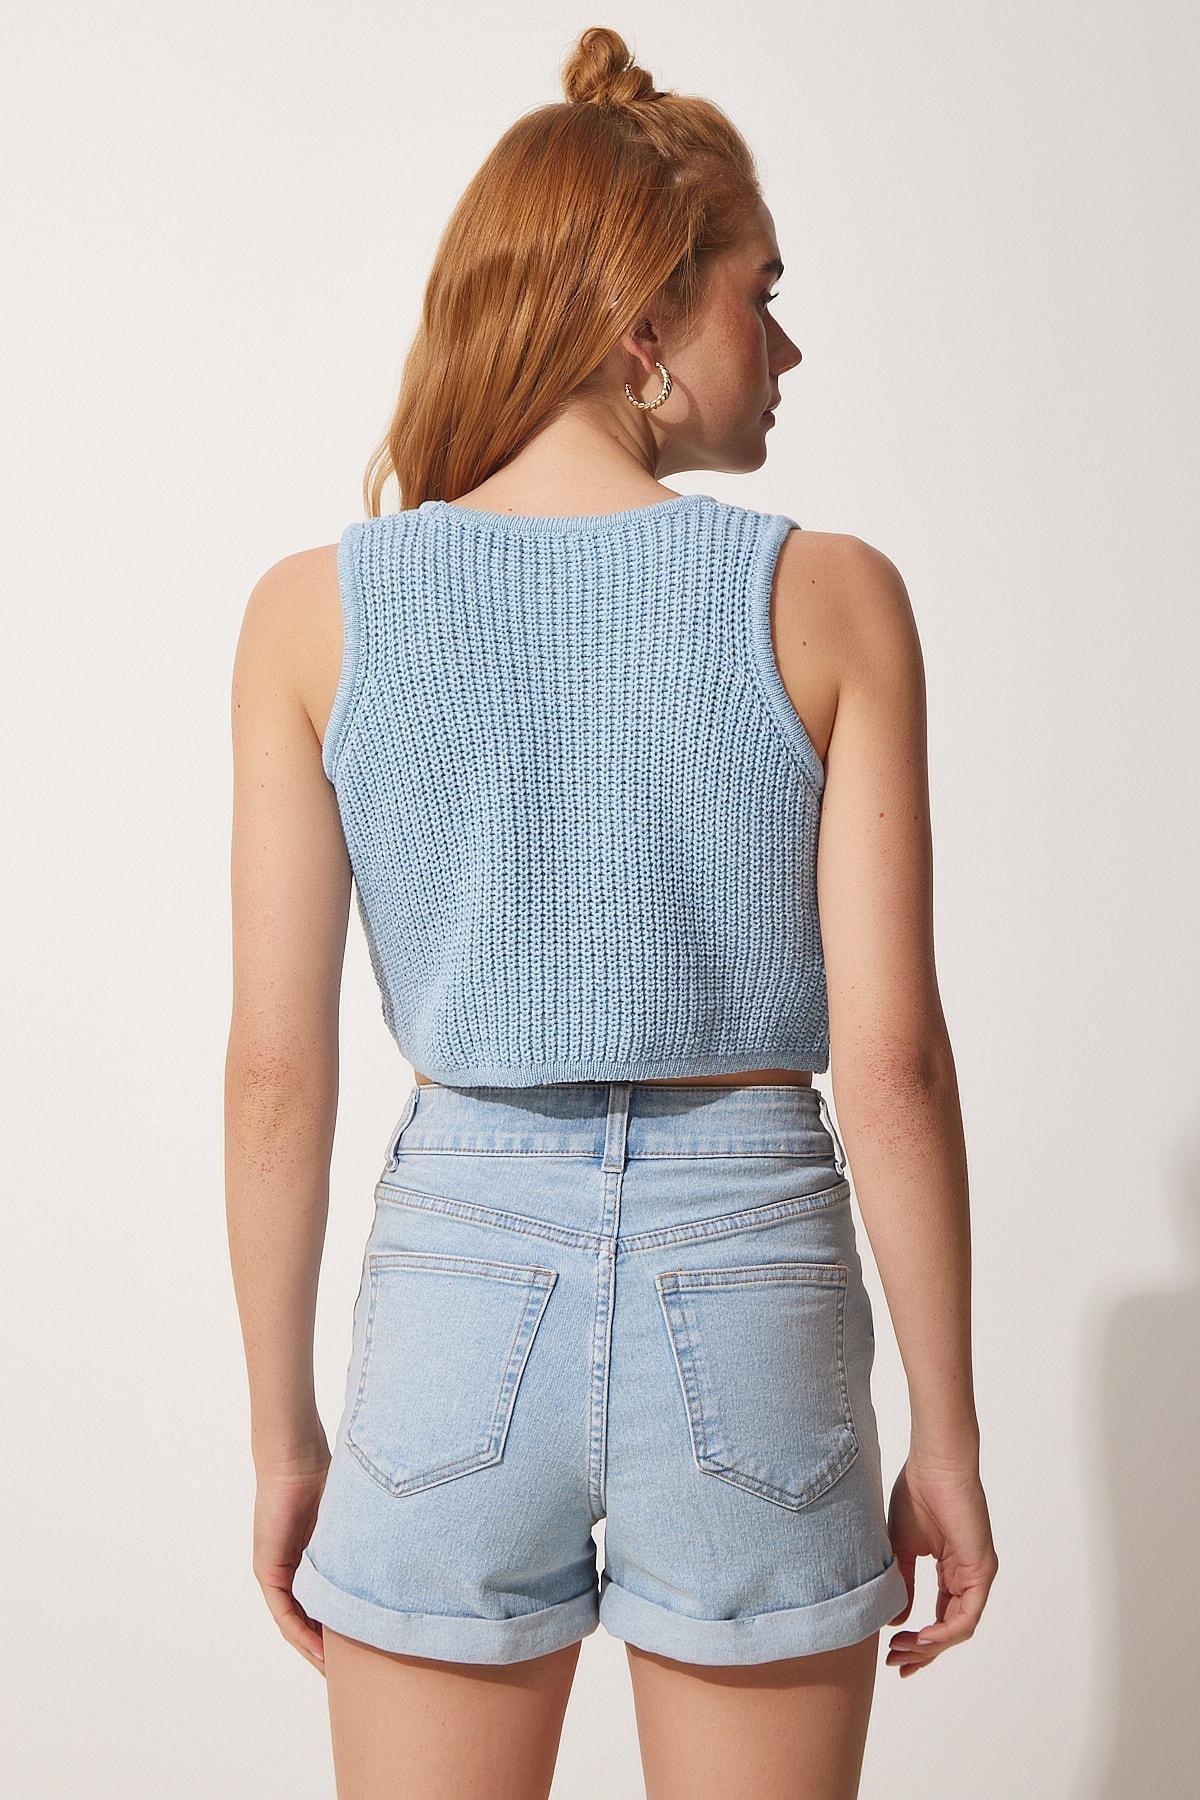 Happiness Istanbul - Blue Knitted Crop Top